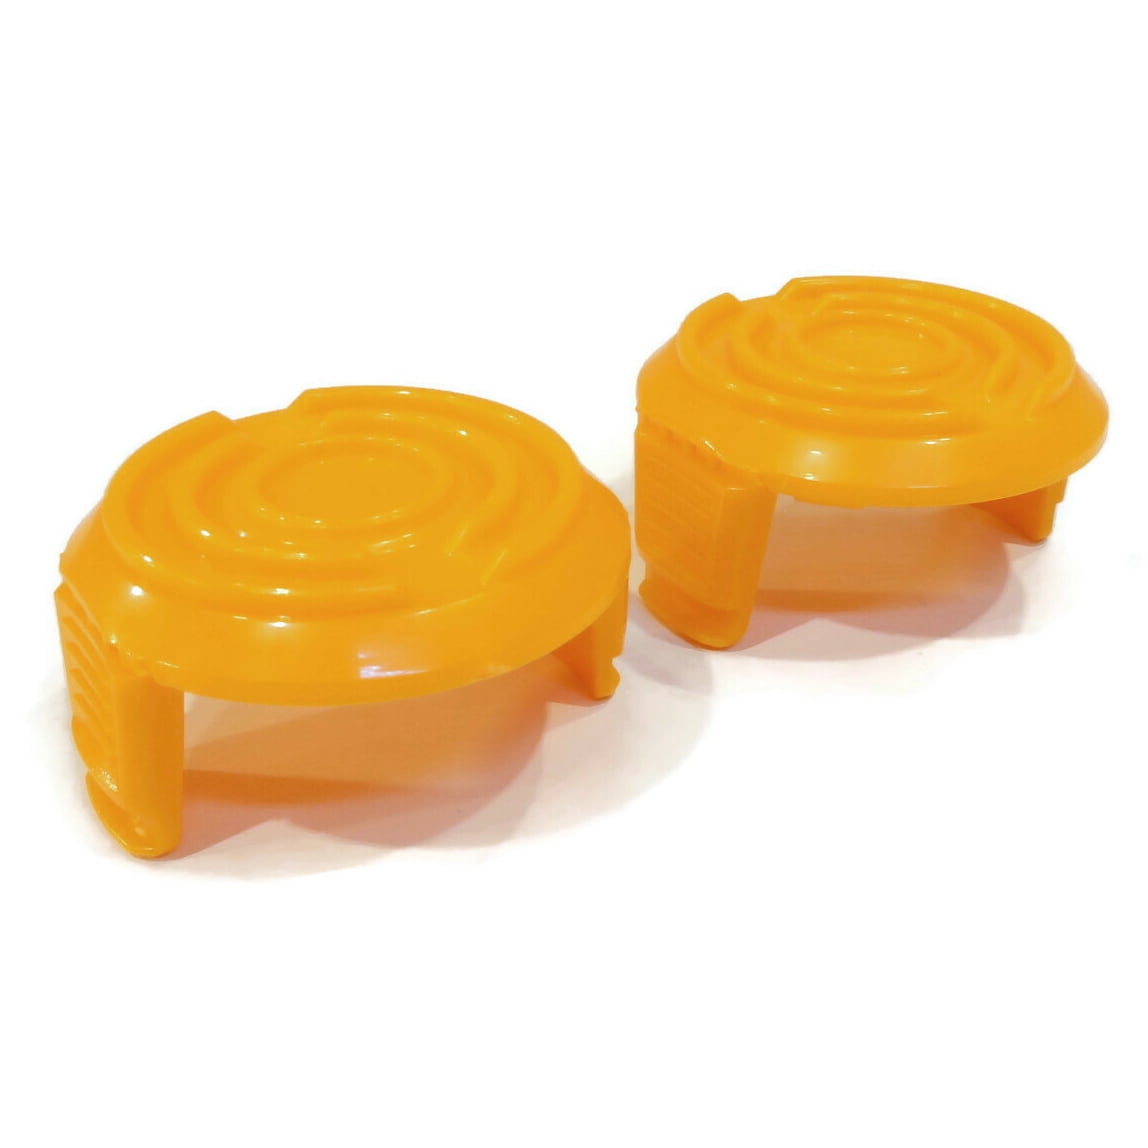 2x Trimmer Spool Cap Cover For WORX WA0216 WG118 WG119 Corded Trimmers TOOL 